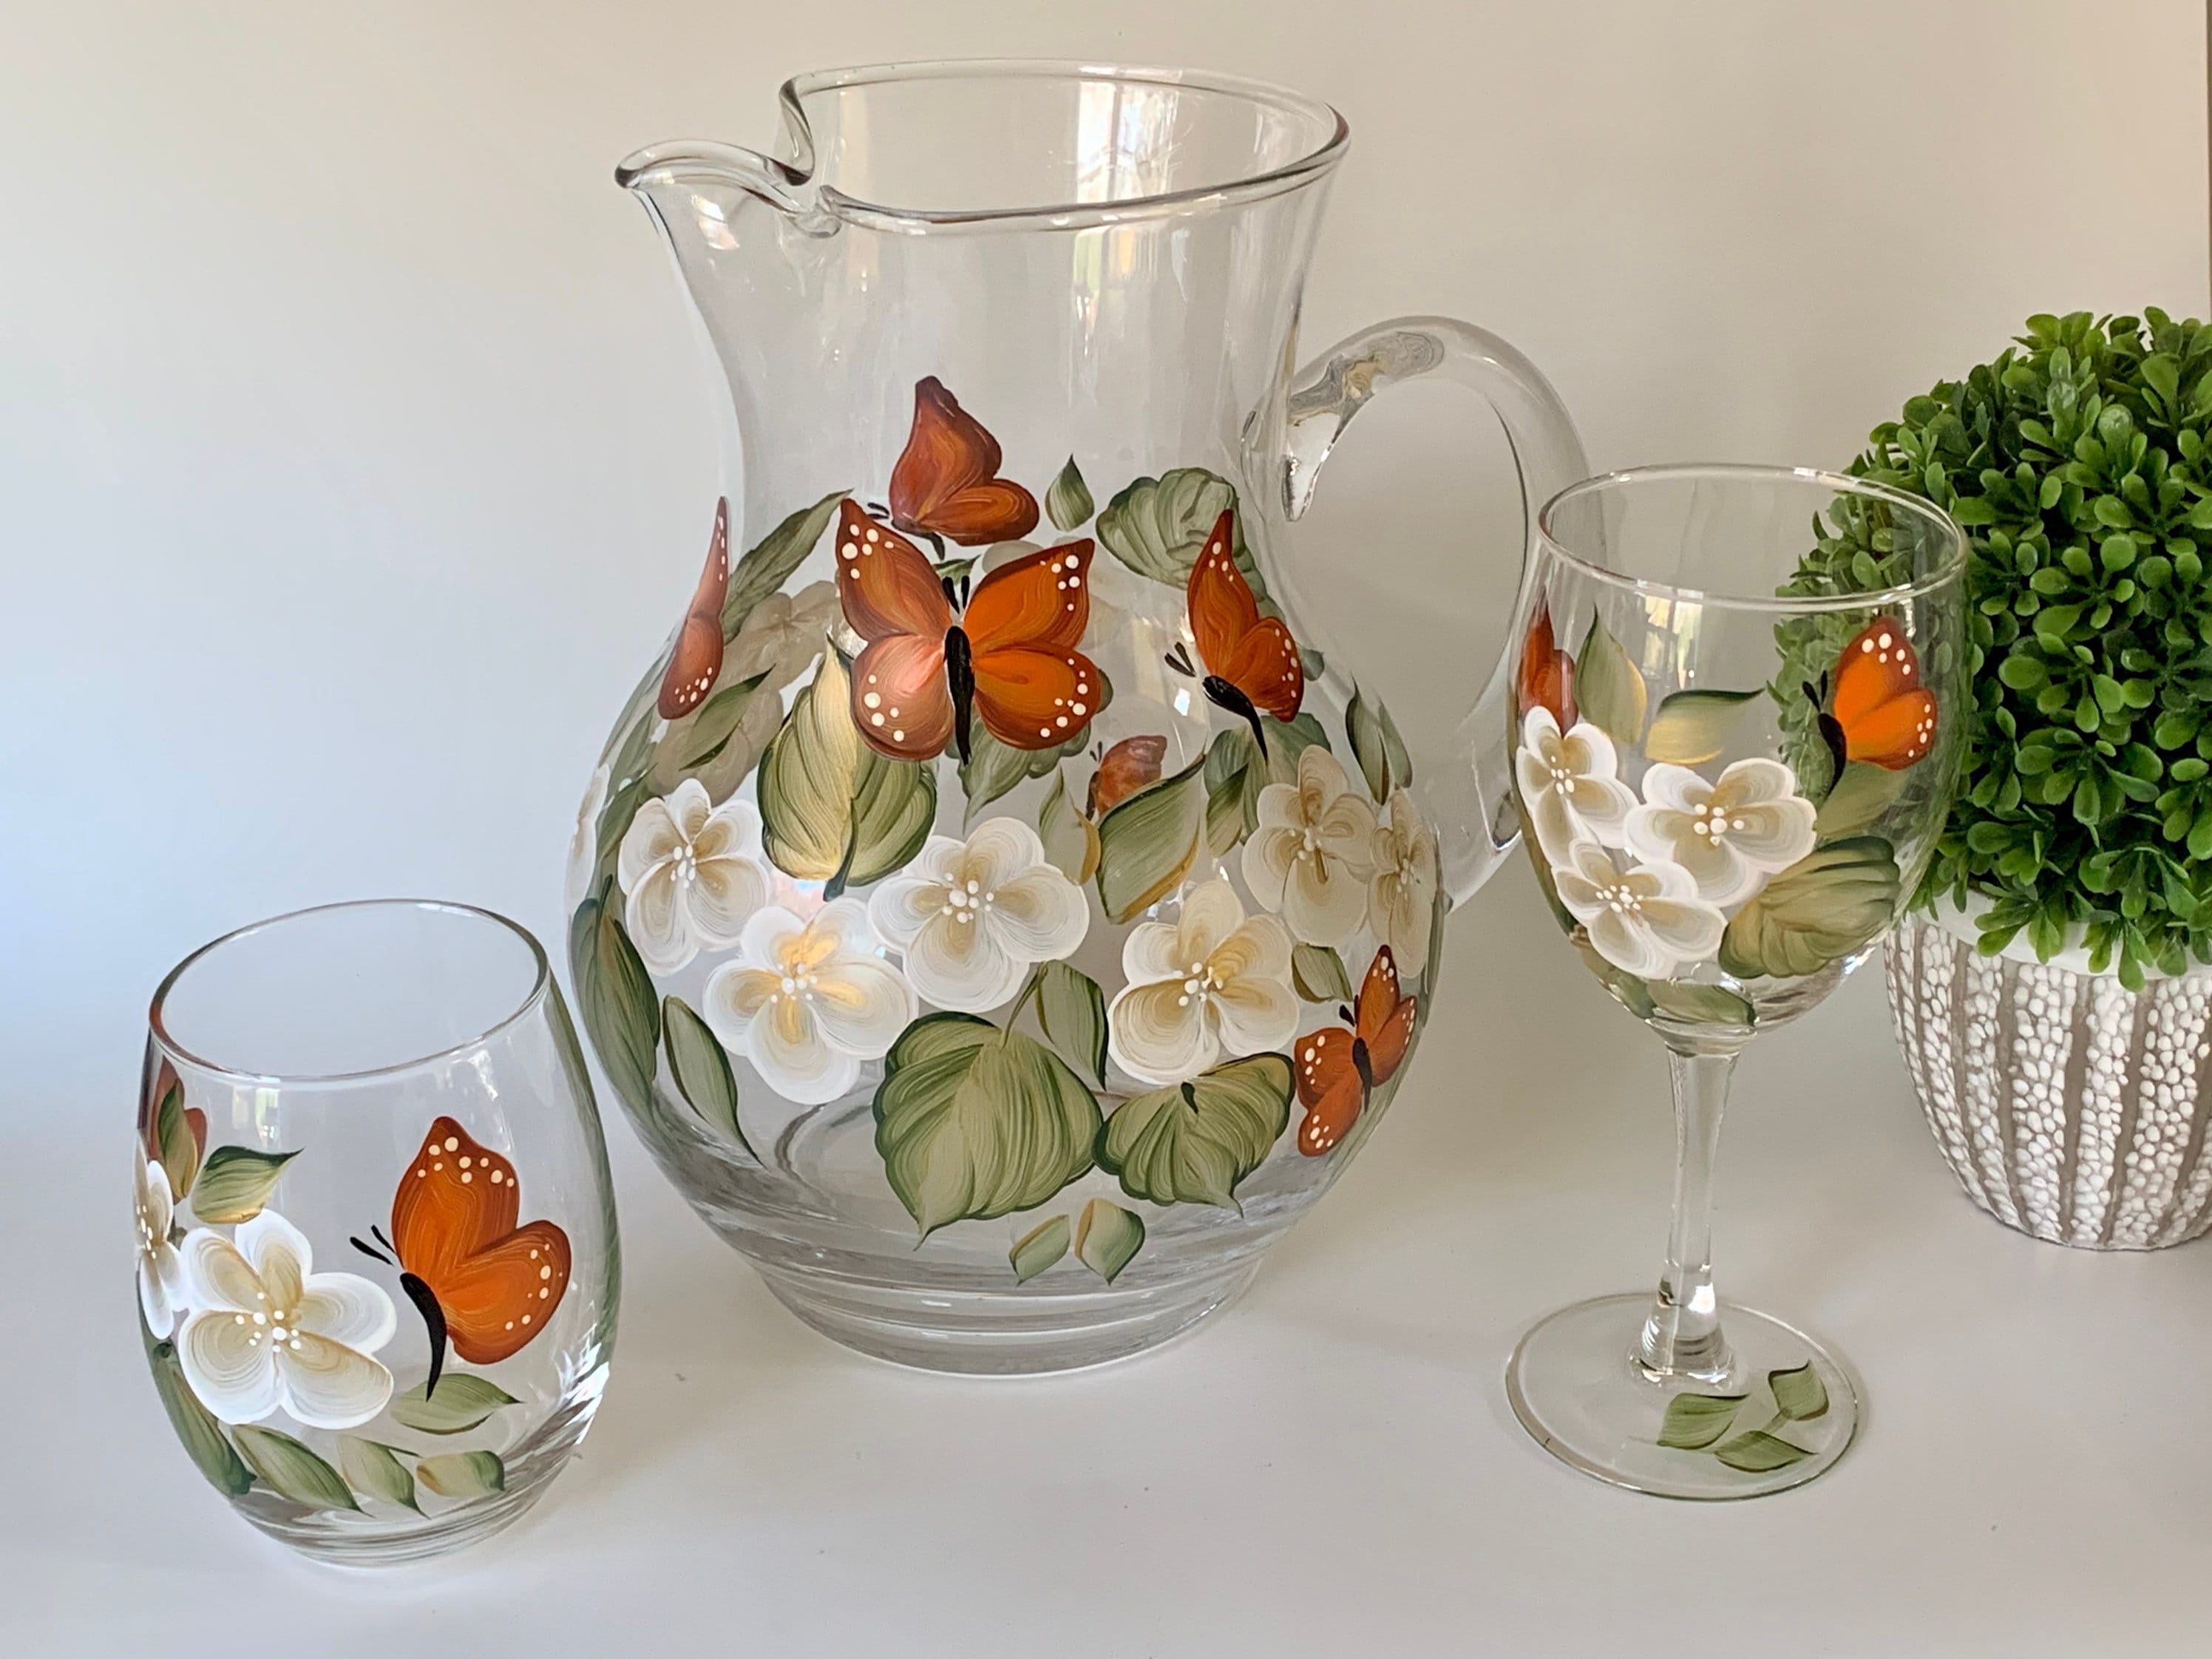 Hand Painted Tulip Pitcher And Glasses Beverage Set